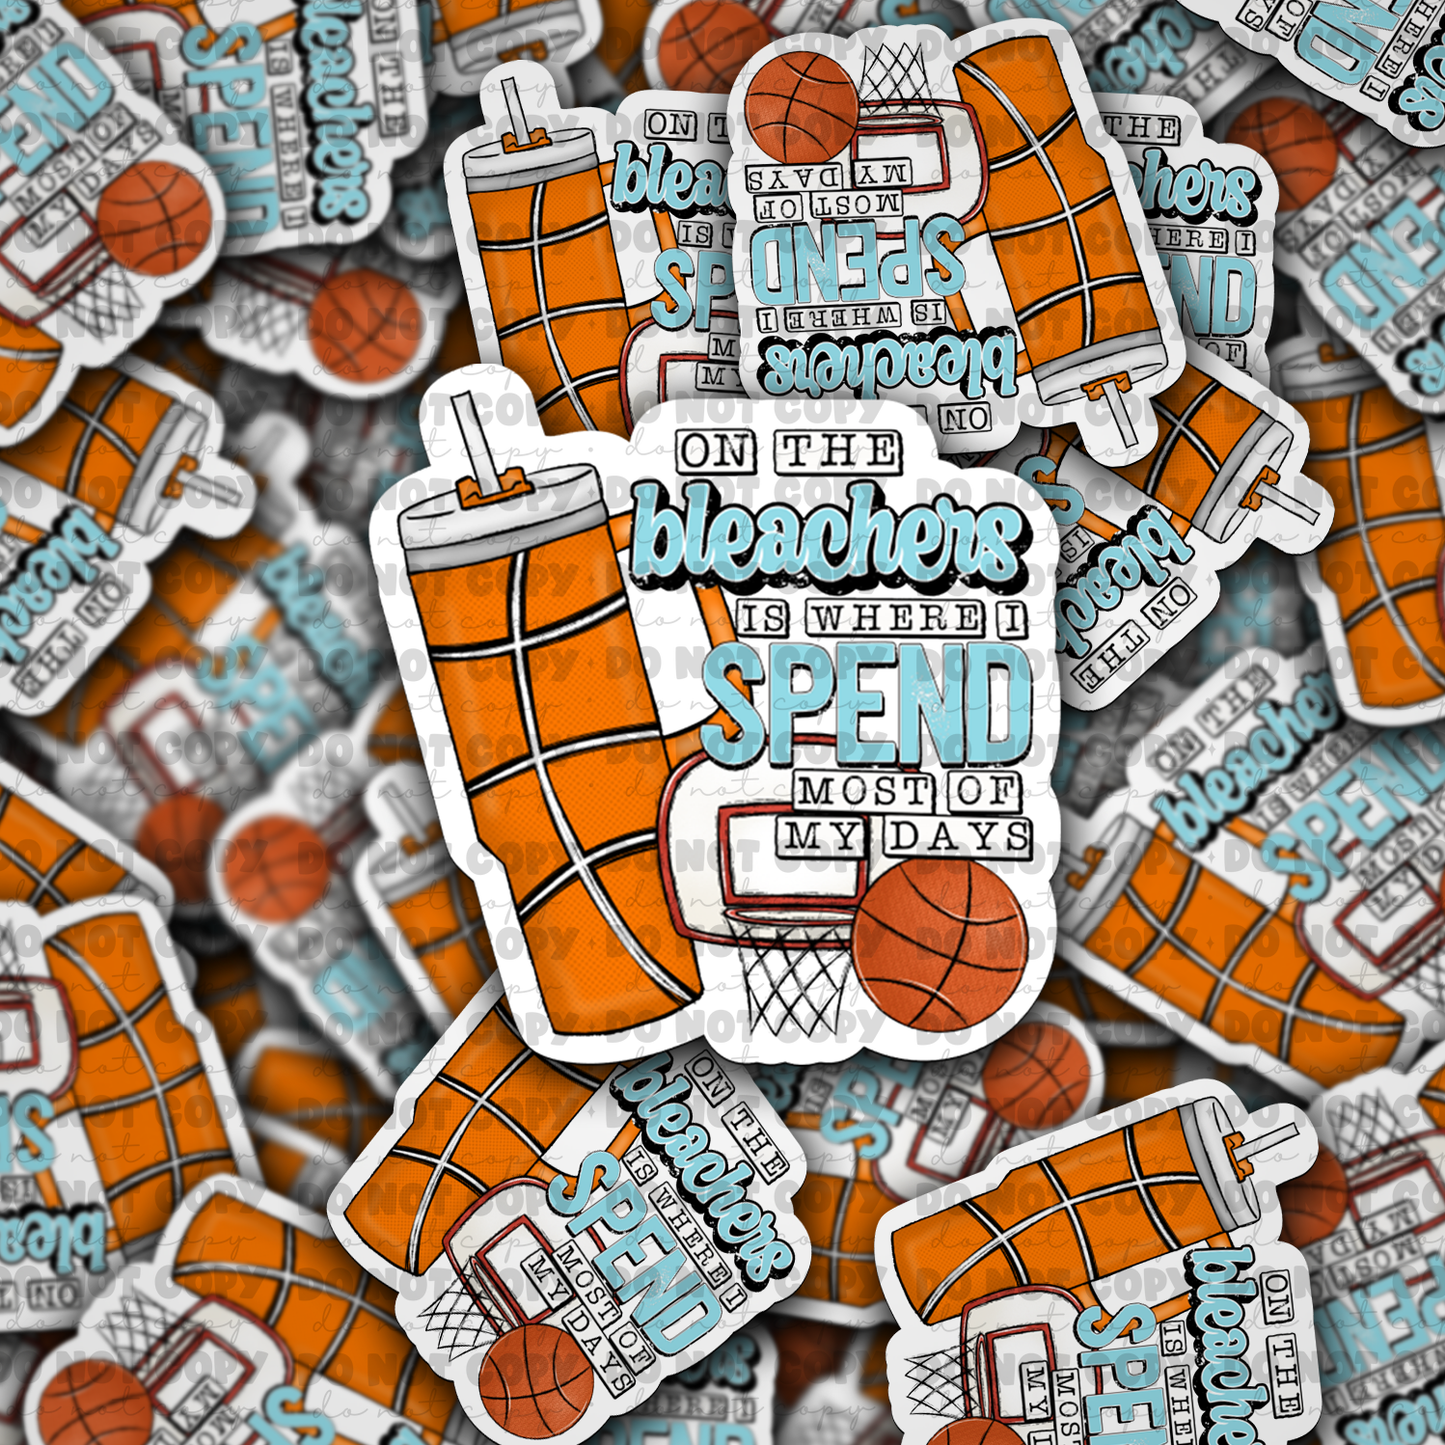 DC 797 On the bleachers is where i spend basketball Die cut sticker 3-5 Business Day TAT